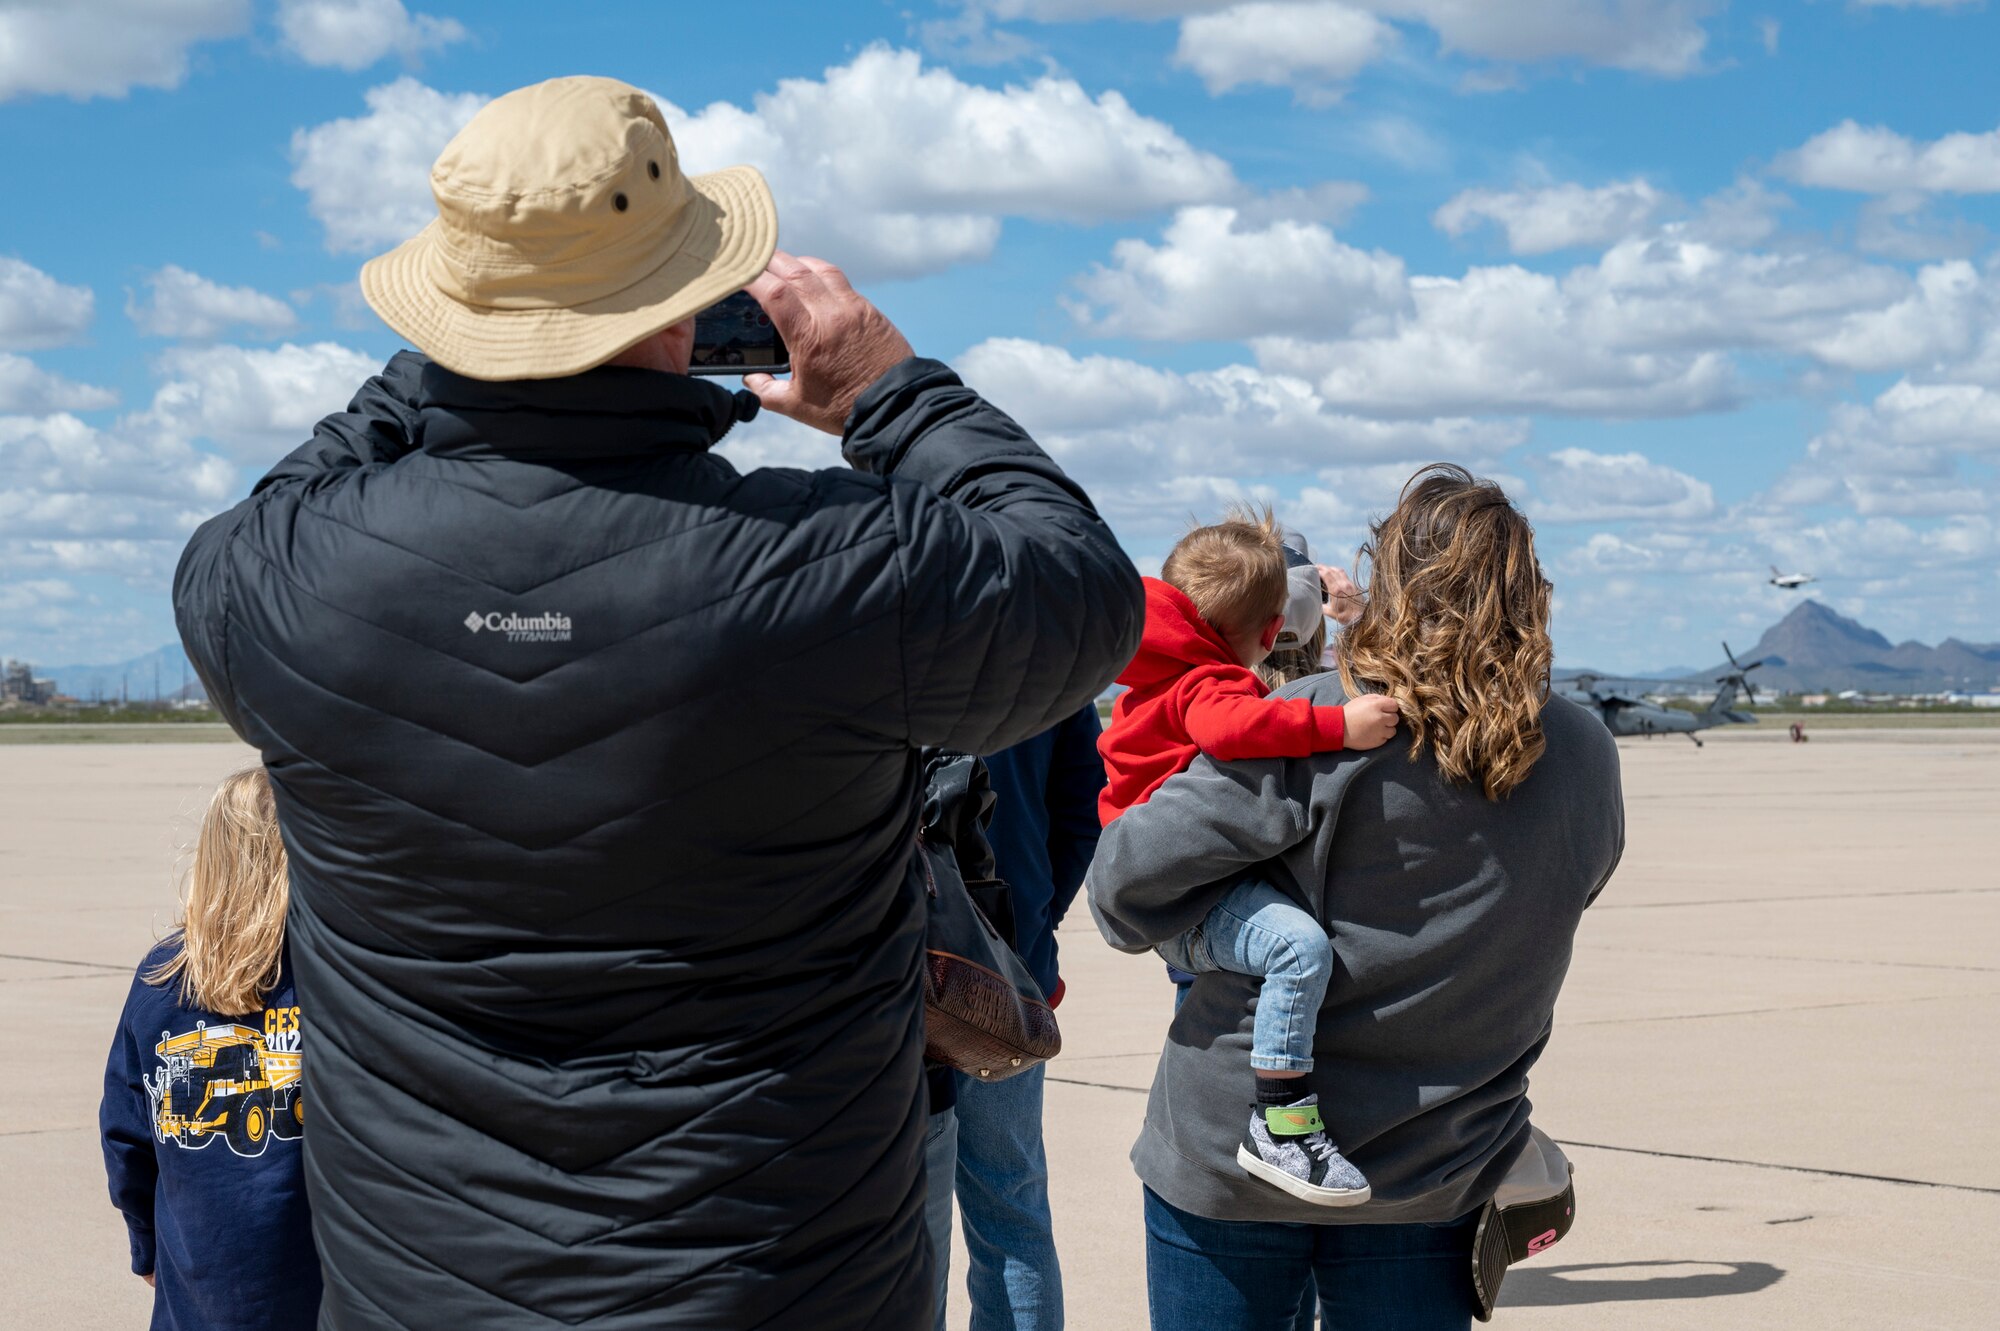 Photo of people and children watching an aircraft take off.